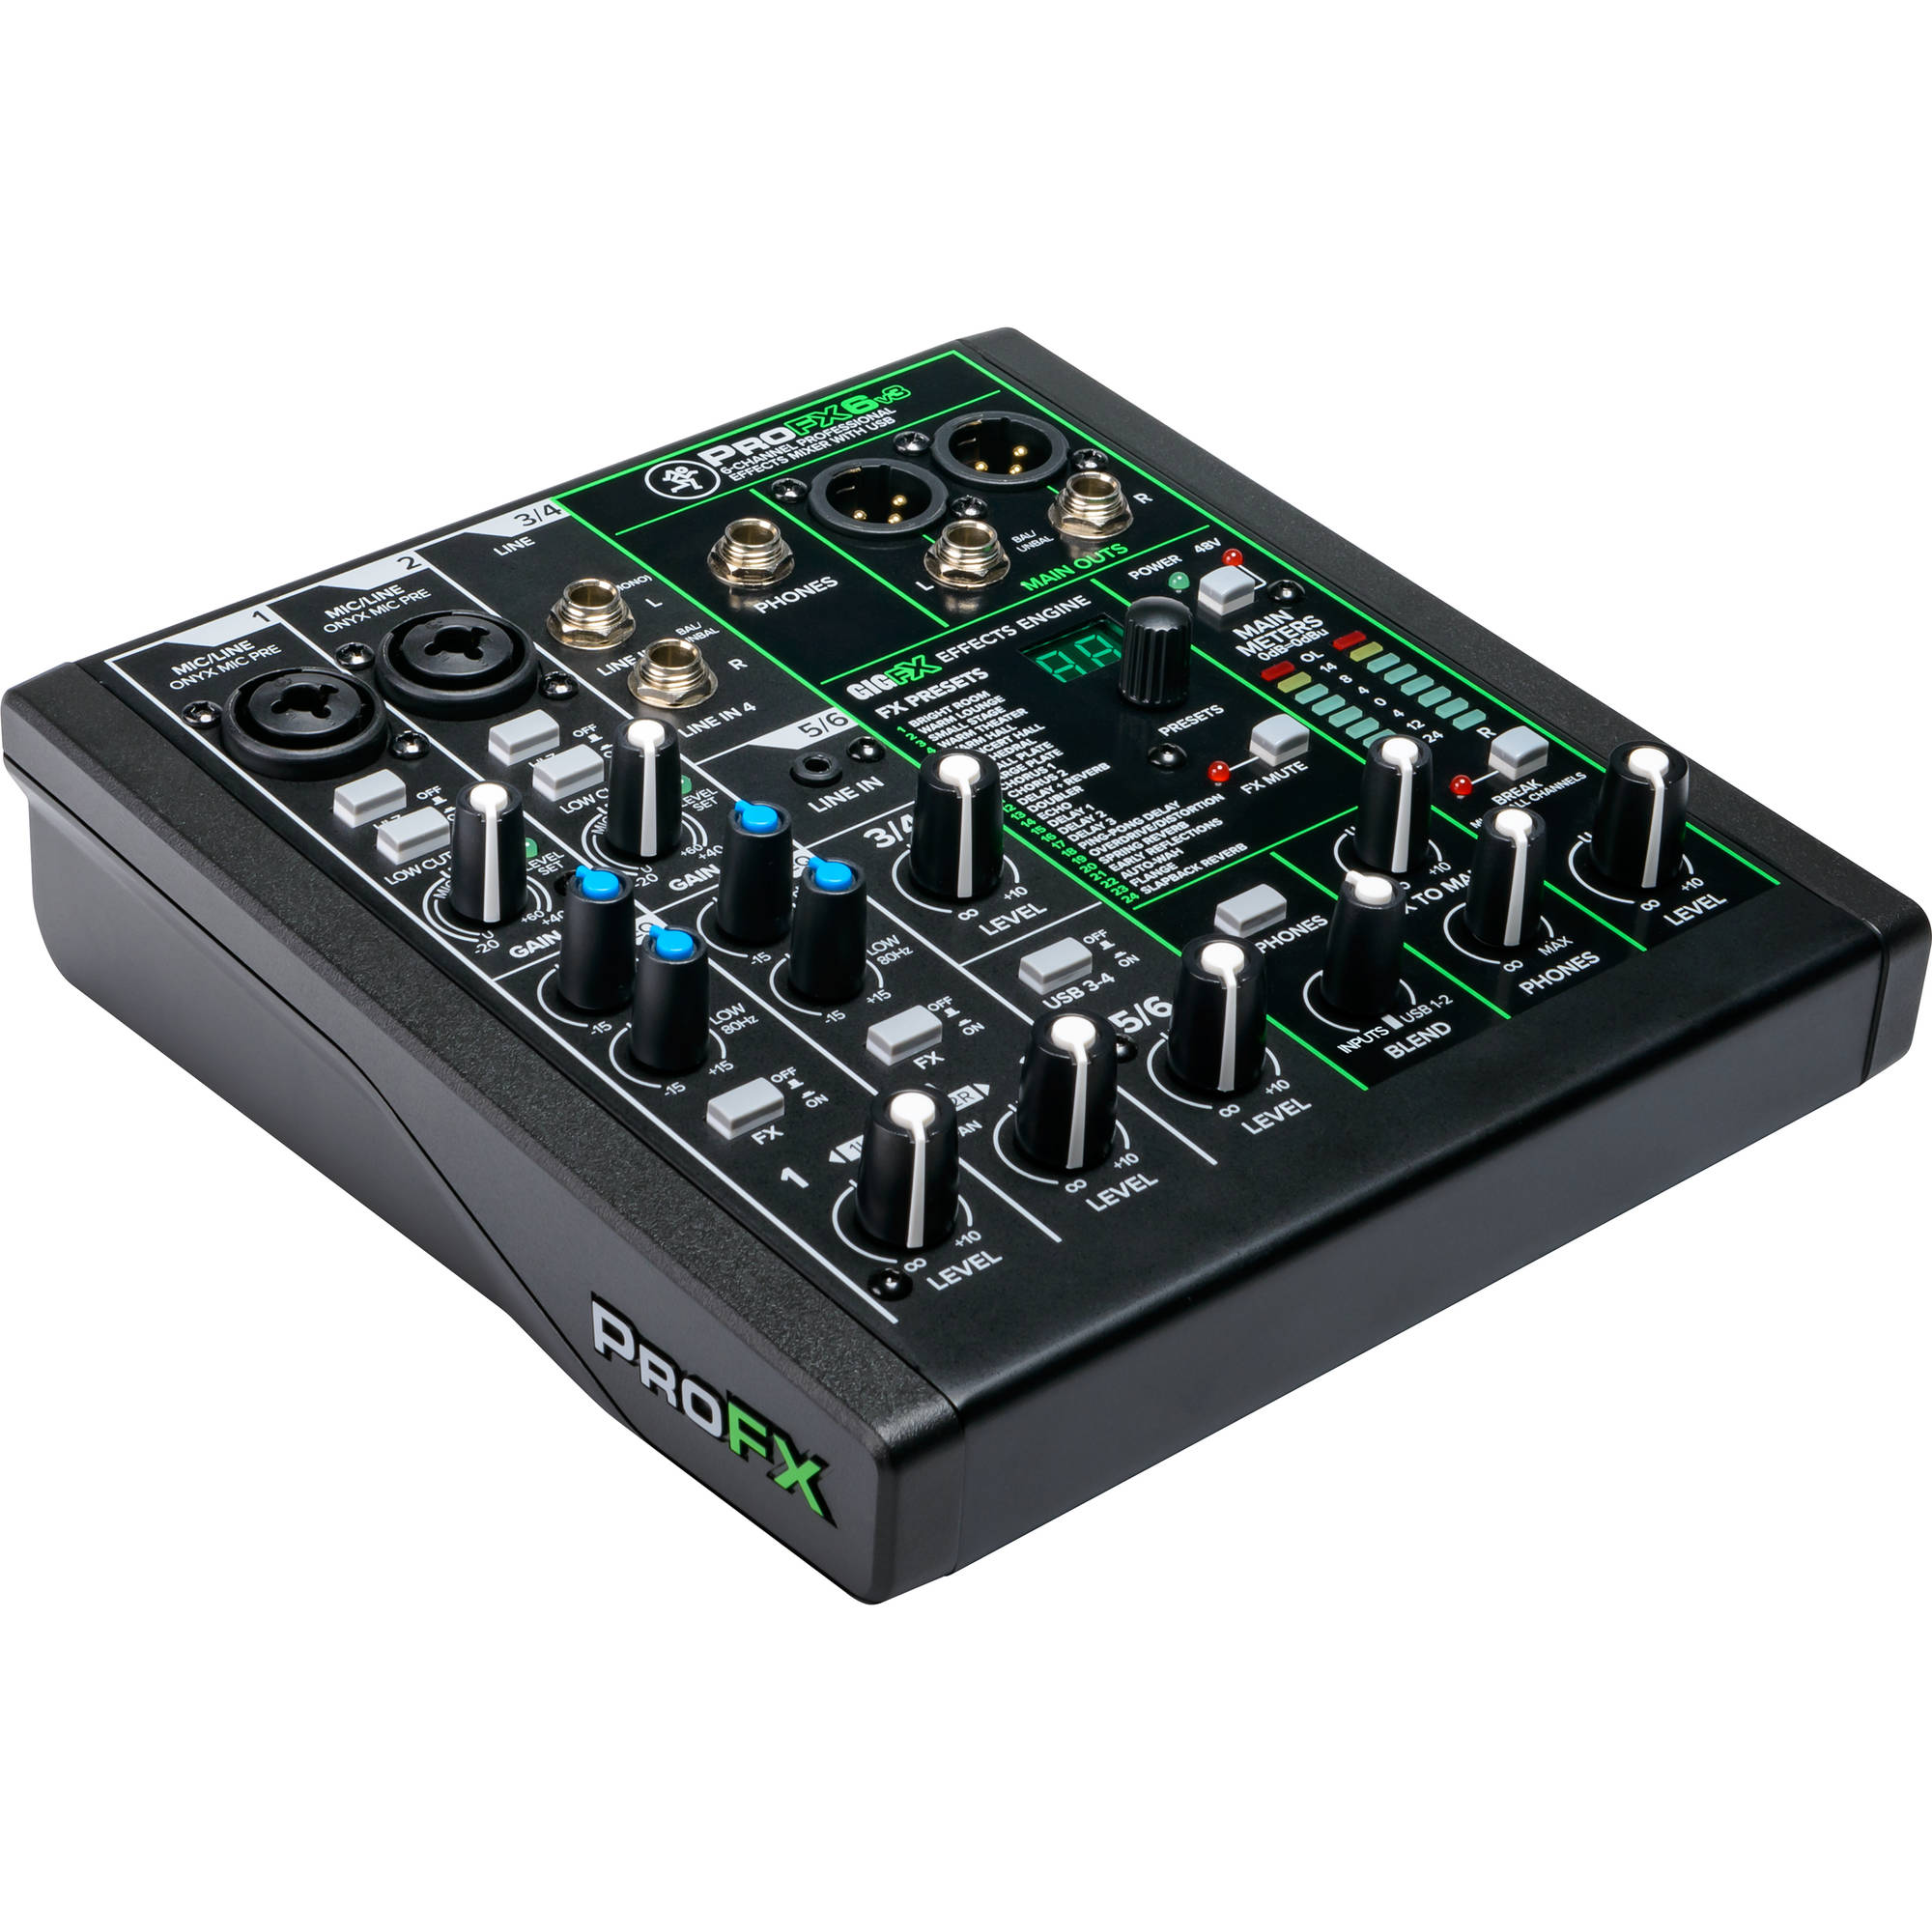 2 Mackie ProFX6v3 6-Channel Mixer with USB and Effects with Pair of EMB XLR Cable and Gravity Magnet Phone Holder Bundle, Renewed